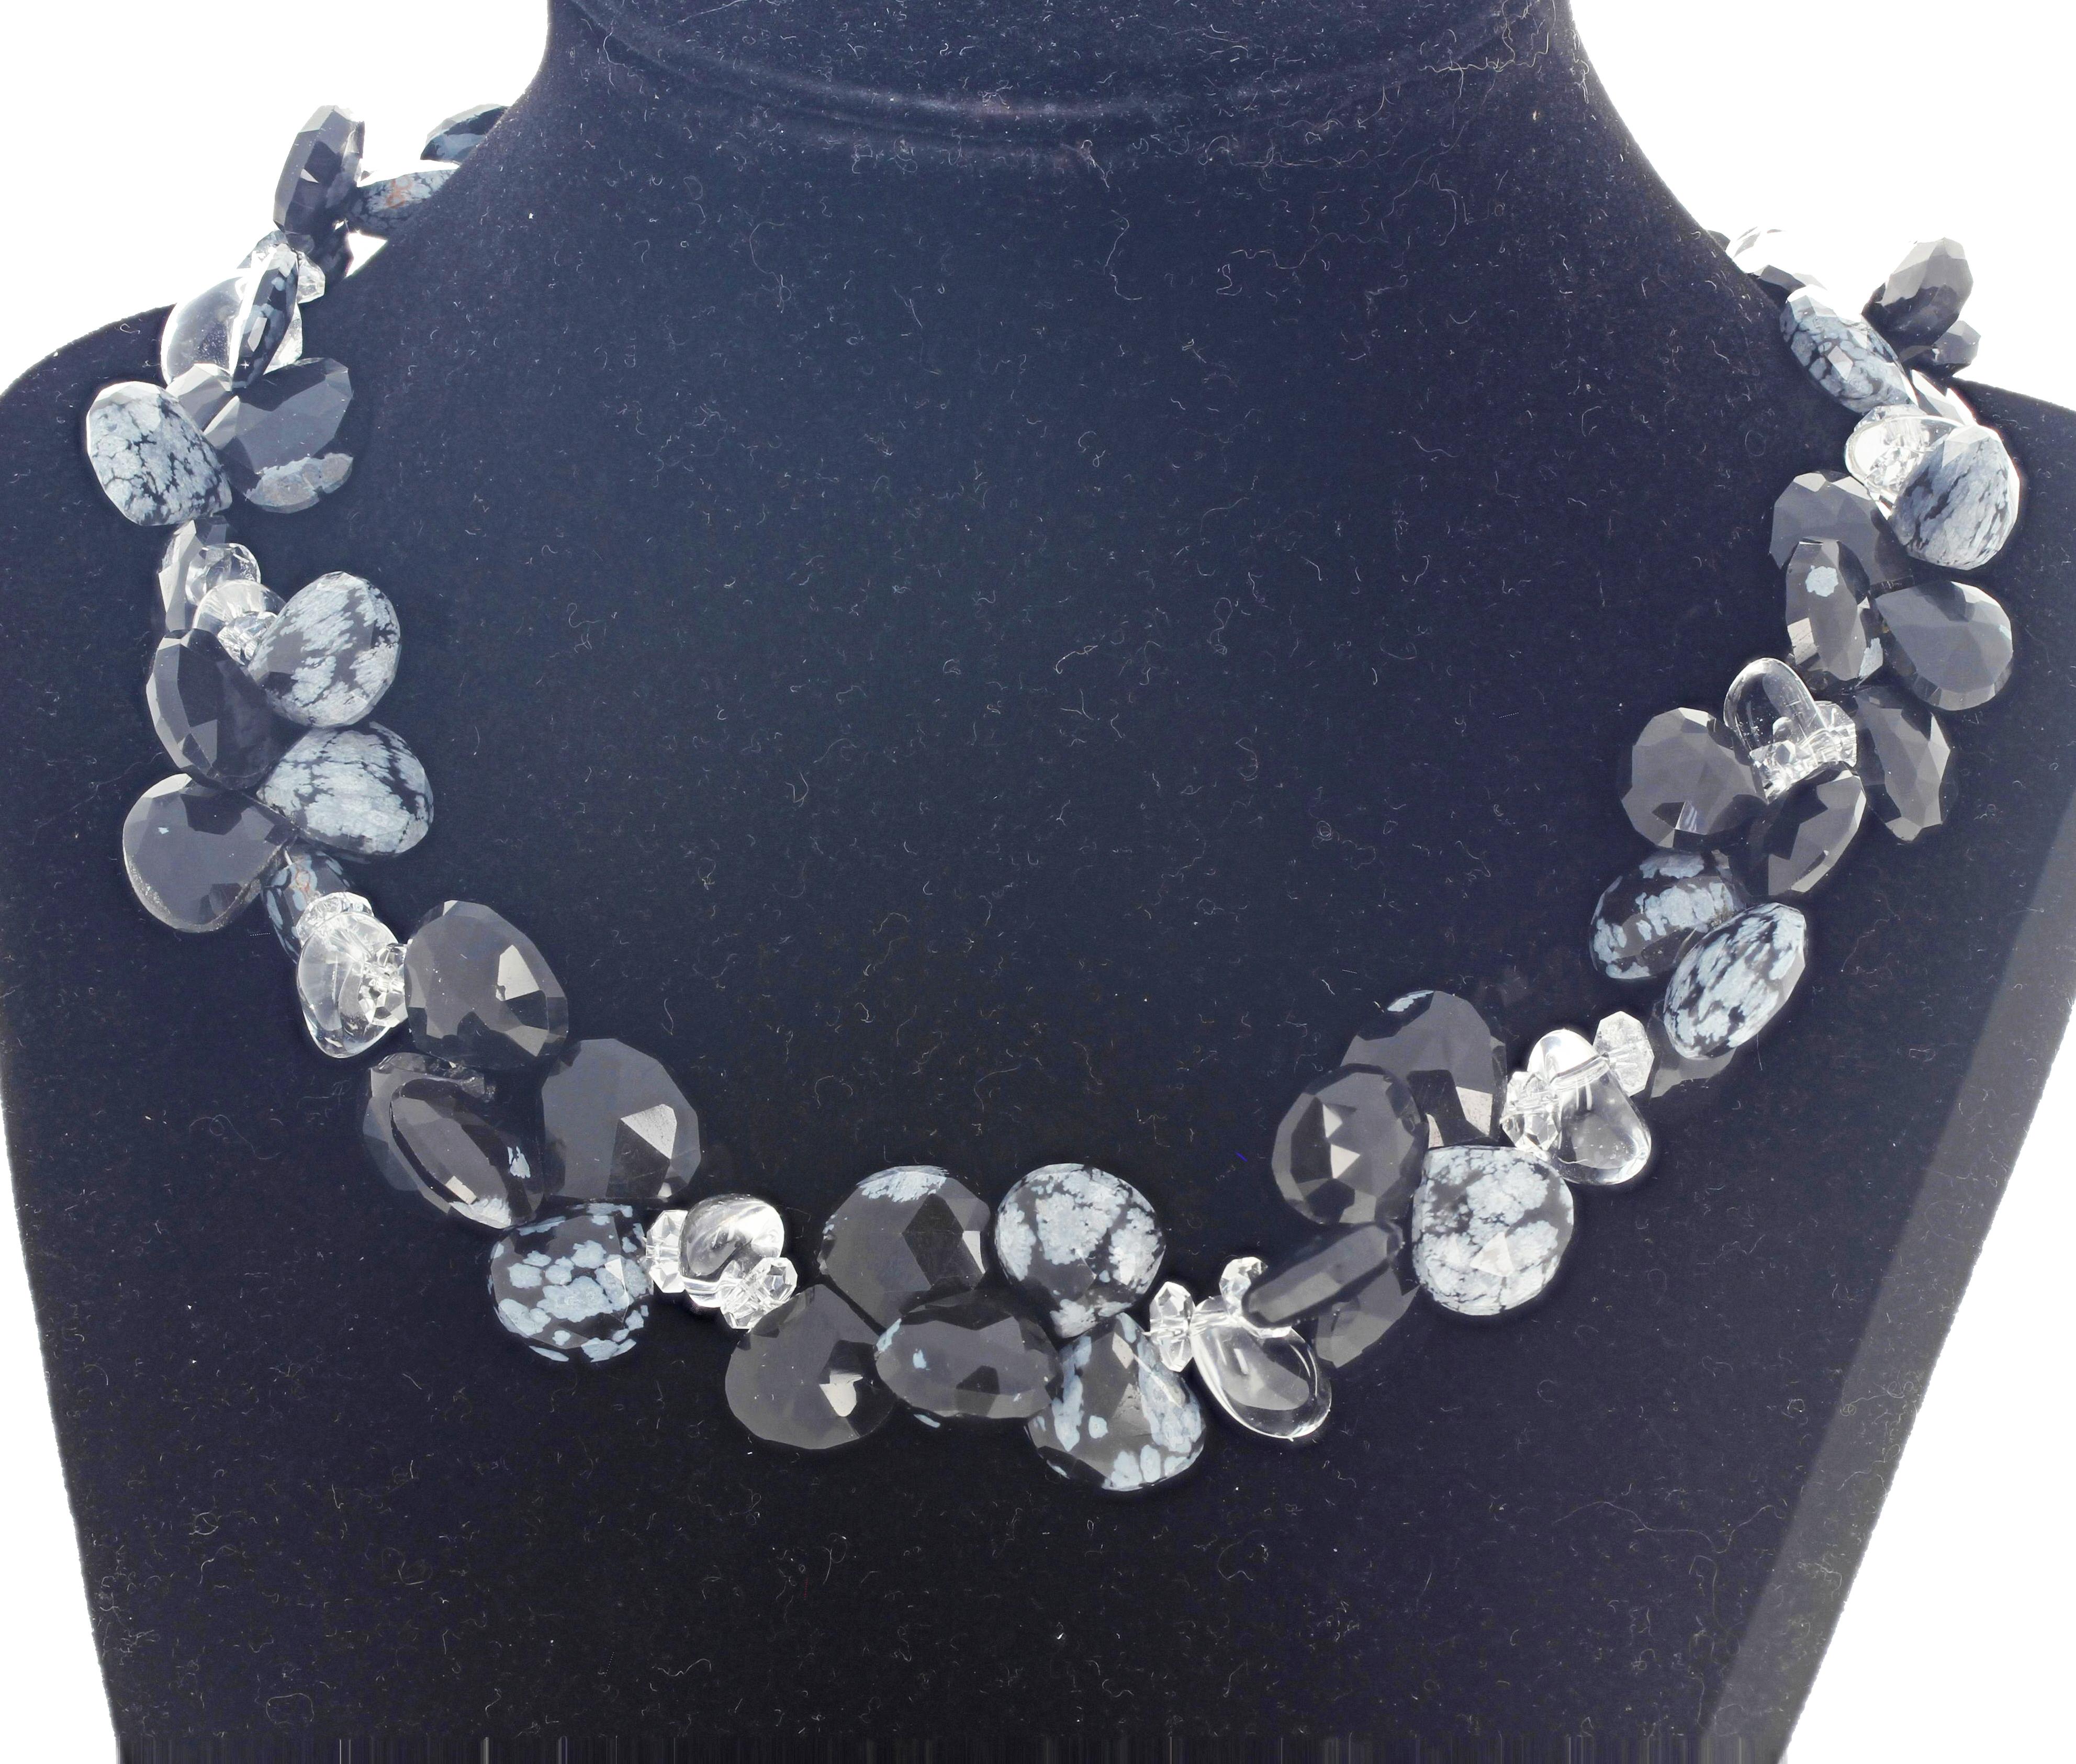 Flippy floppy fascinating beautifully highly polished unusual rare Snowflake Obsidian enhanced with glittering polished chunks of clear silvery sparkling white Quartz set in a 17 inch long necklace with silver plated easy to use clasp.  The